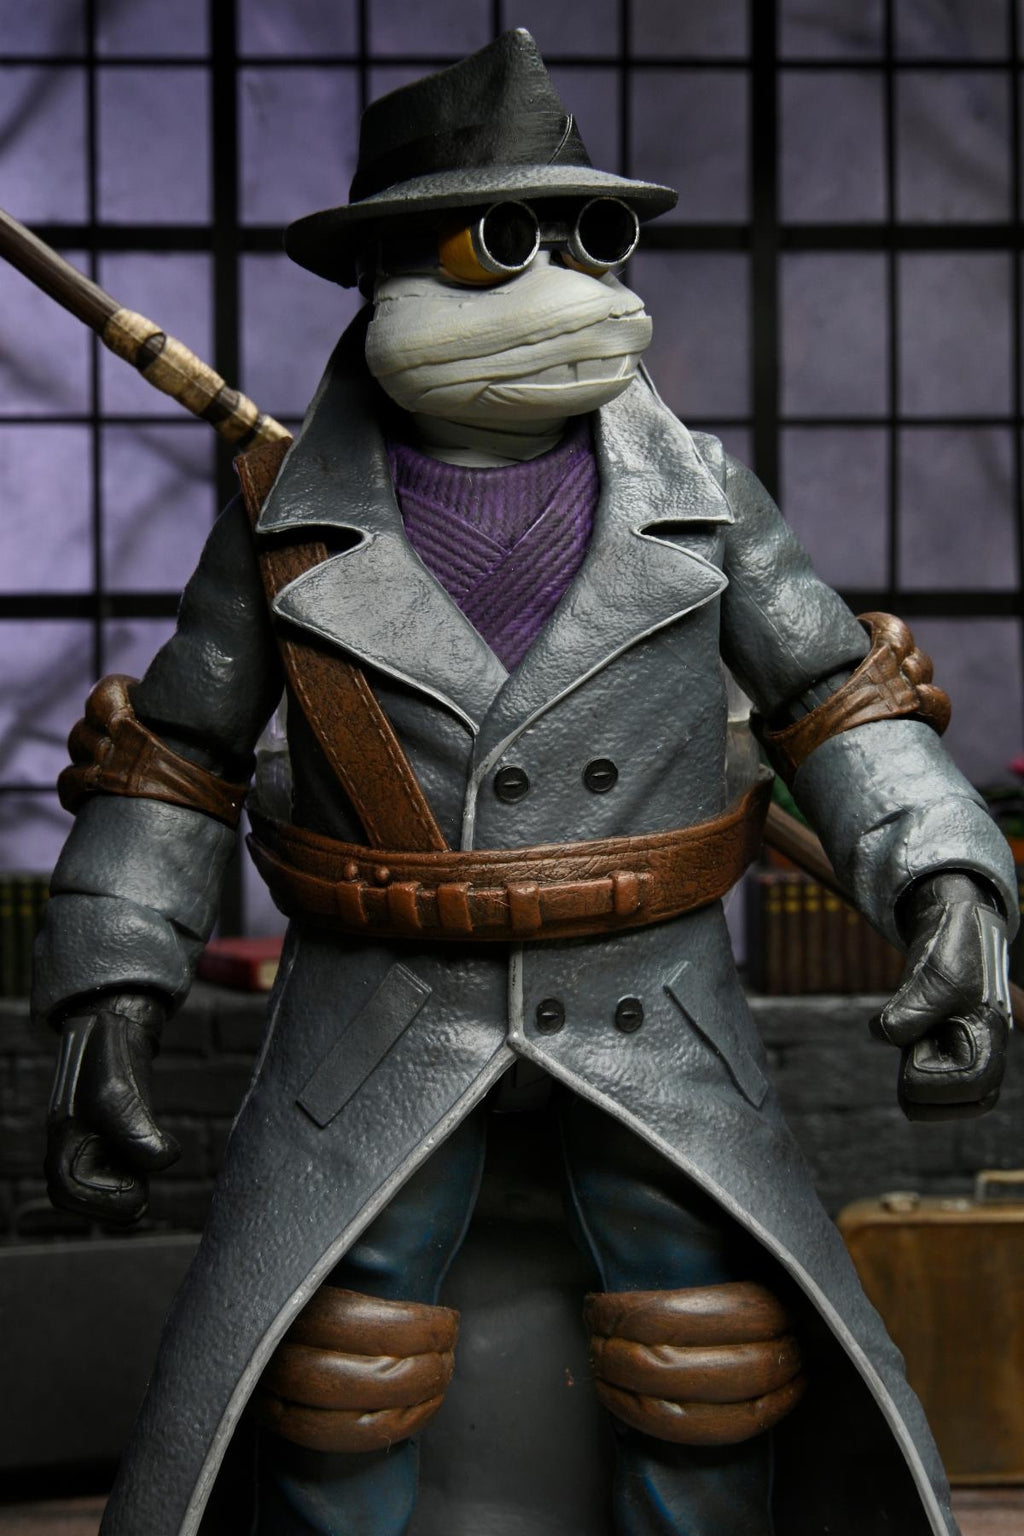 Universal Monsters x Teenage Mutant Ninja Turtles - 7" Scale Action Figure - Ultimate Donatello as The Invisible Man